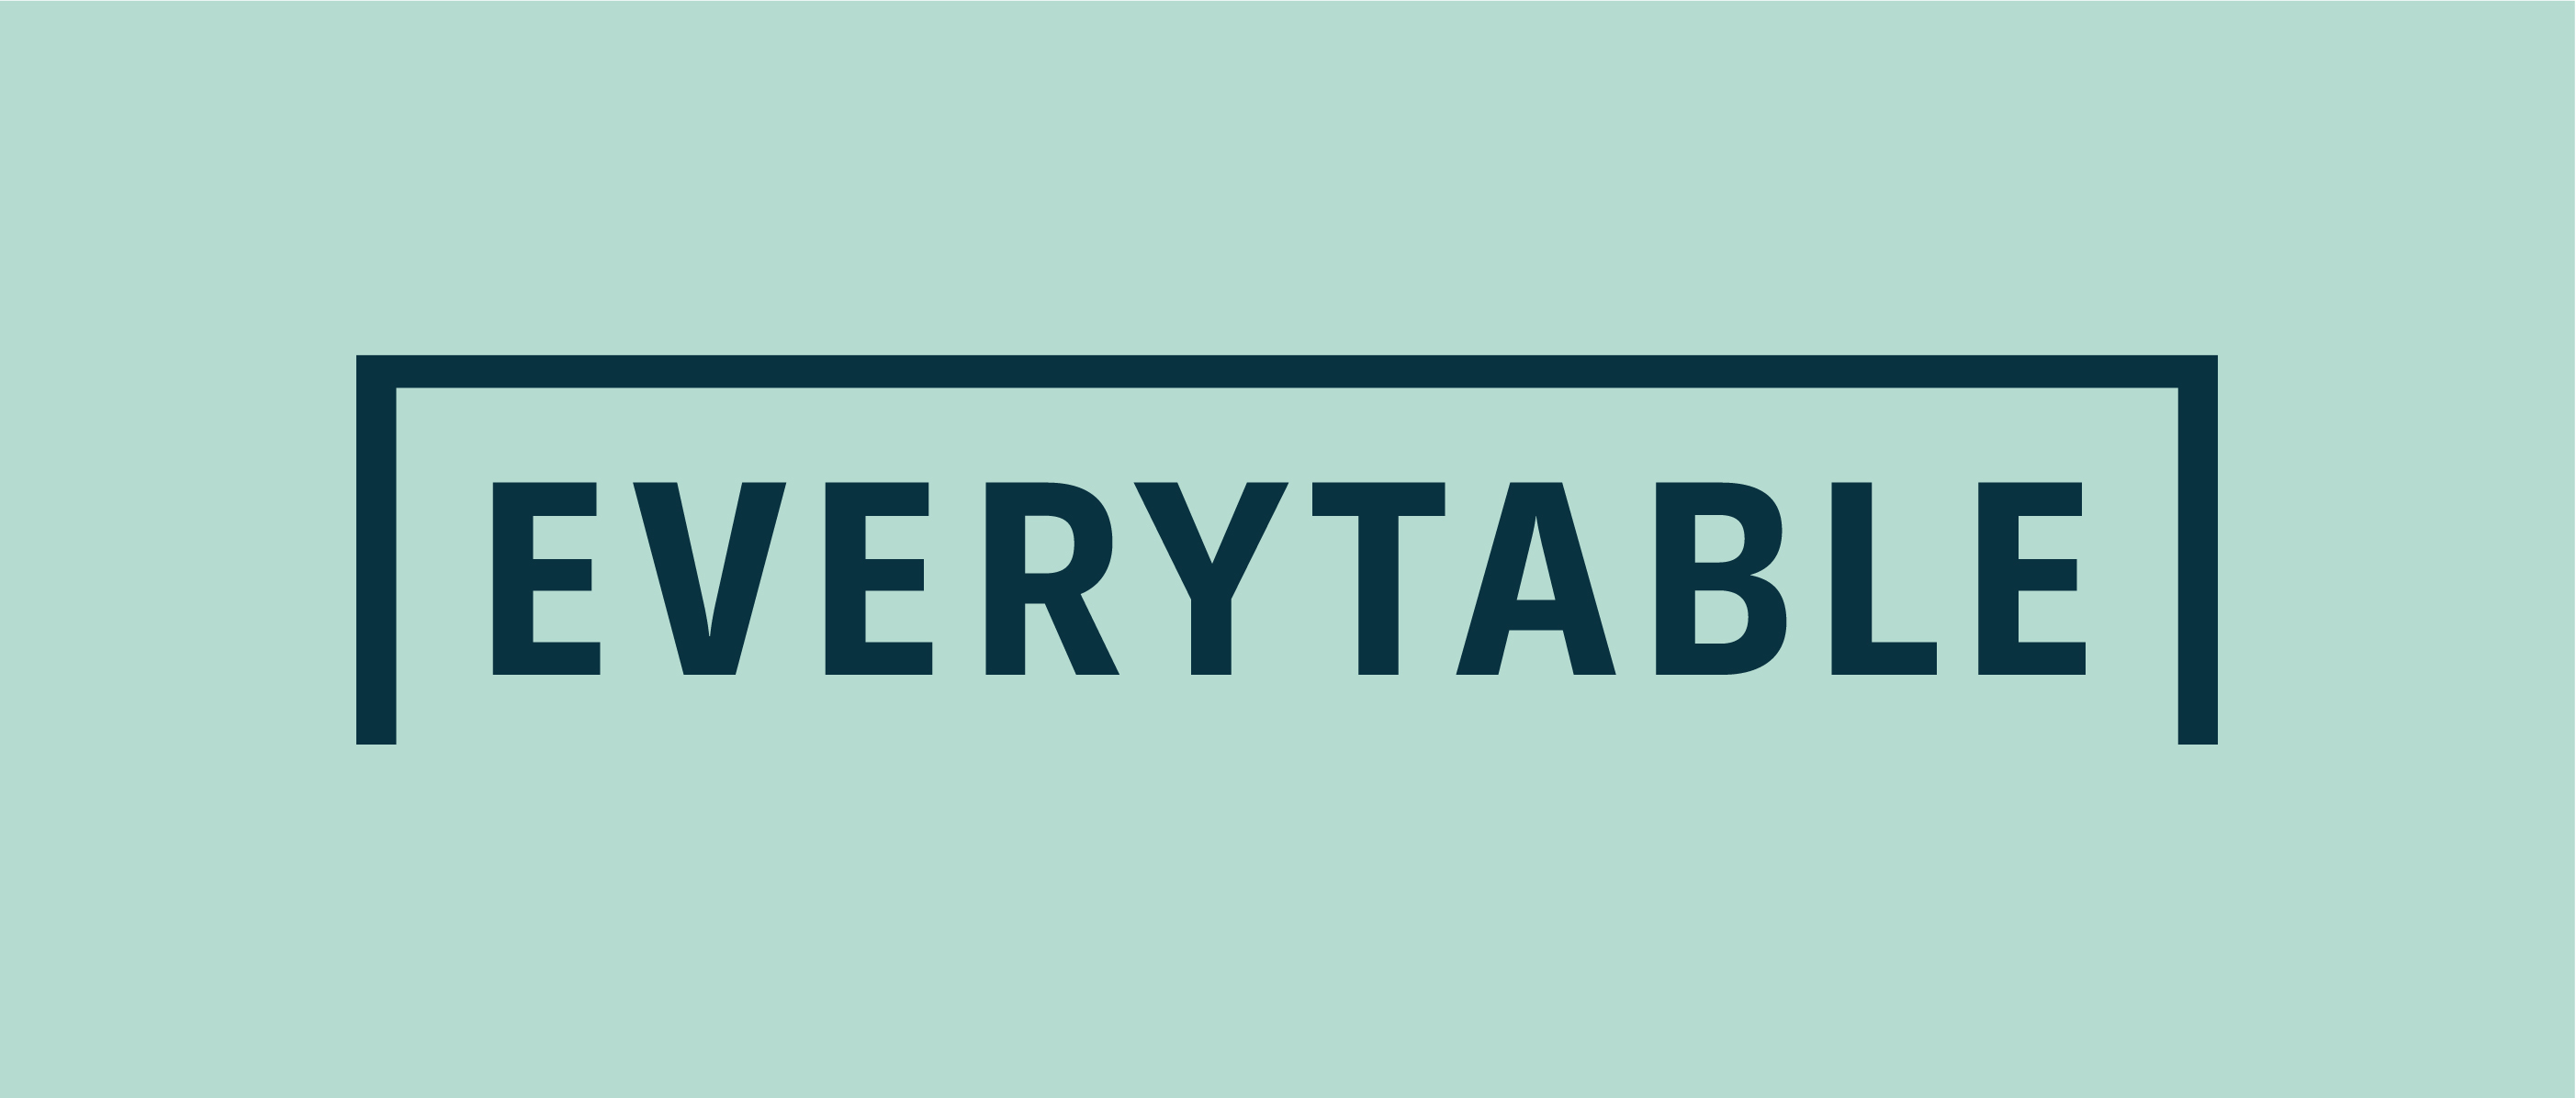 Everytable text in blue on mint green background